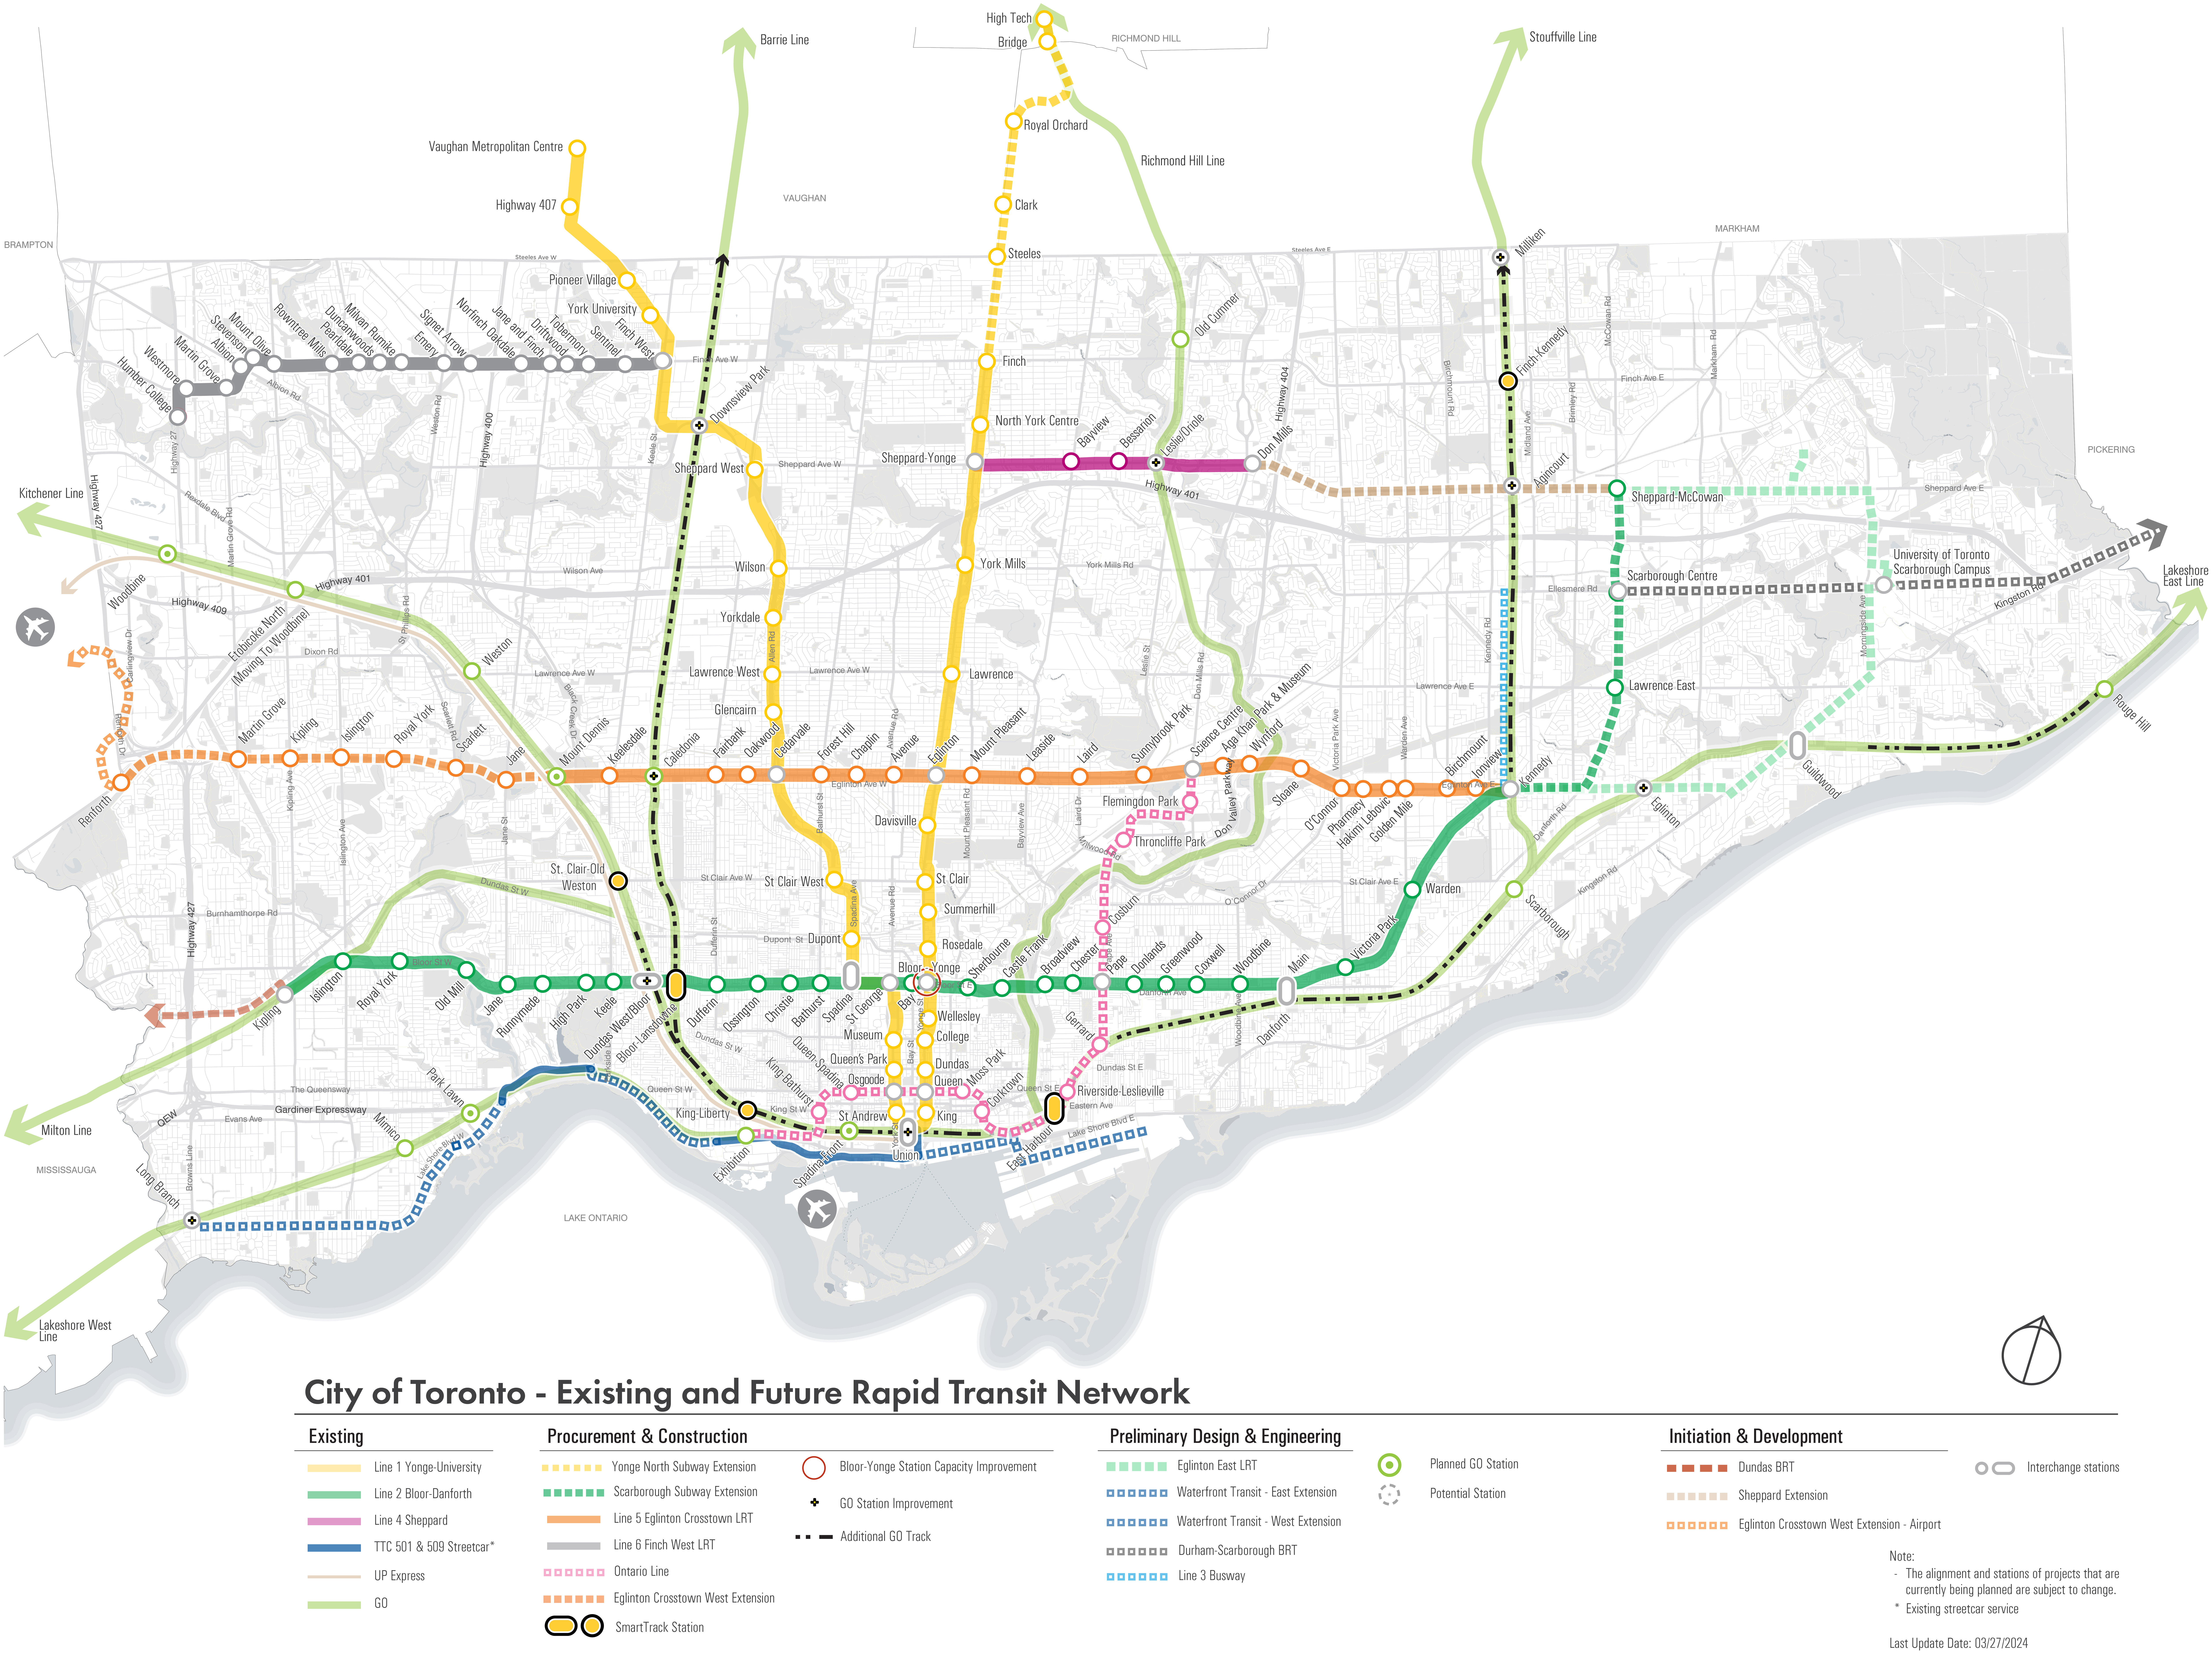 A detailed map of the City of Toronto and neighbouring towns and cities depicting existing and future rapid transit network plans including subways, light rail, bus rapid and heavy rail transit lines. The map displays lines and stations, as well as transit hubs, that are existing, under procurement and construction, preliminary design and in development as of September 2022.